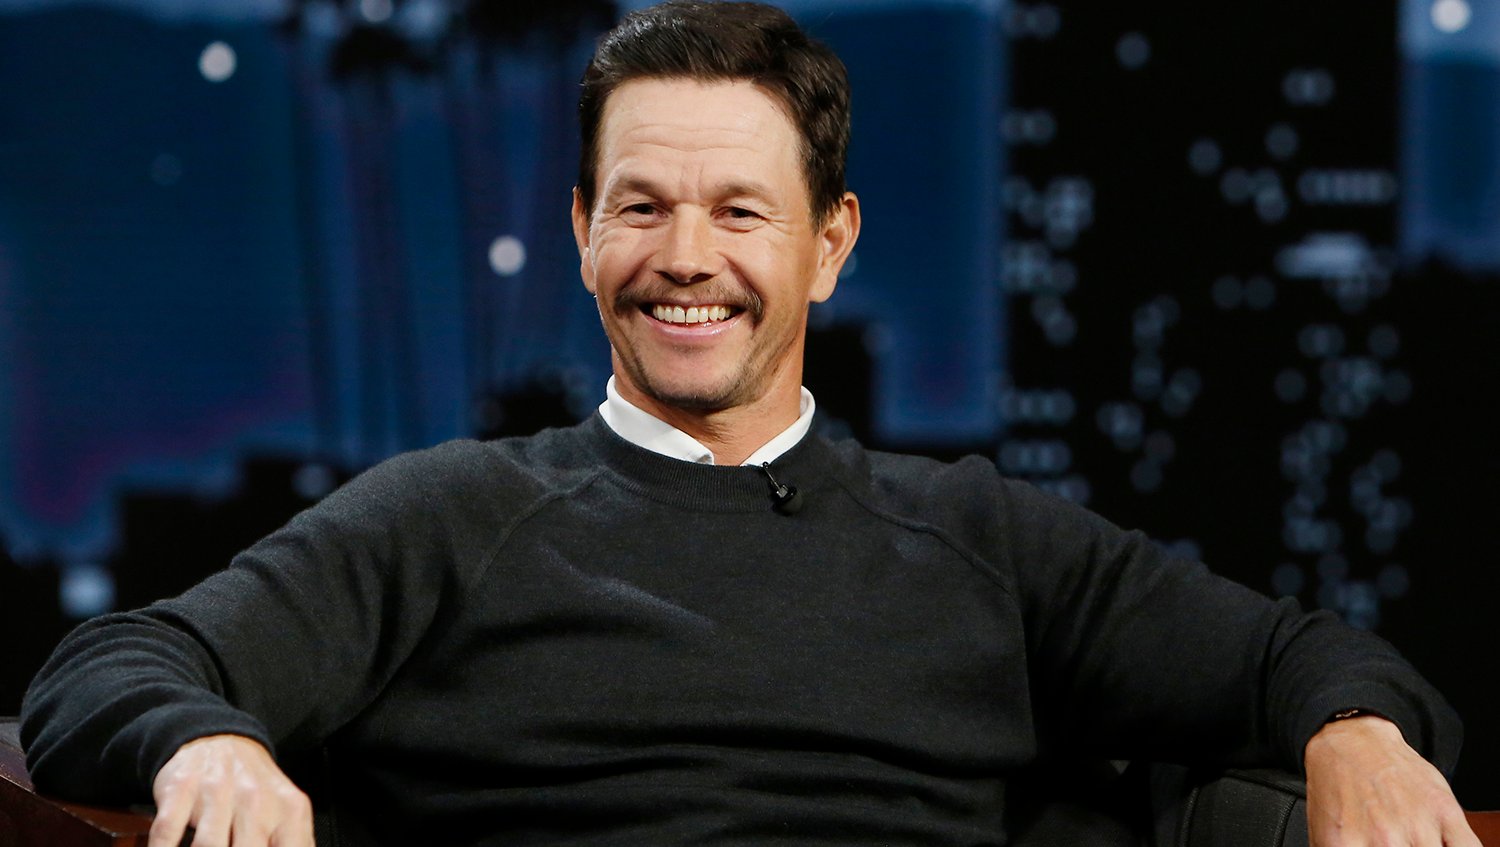 Uncharted star Mark Wahlberg on Jimmy Kimmel Live!